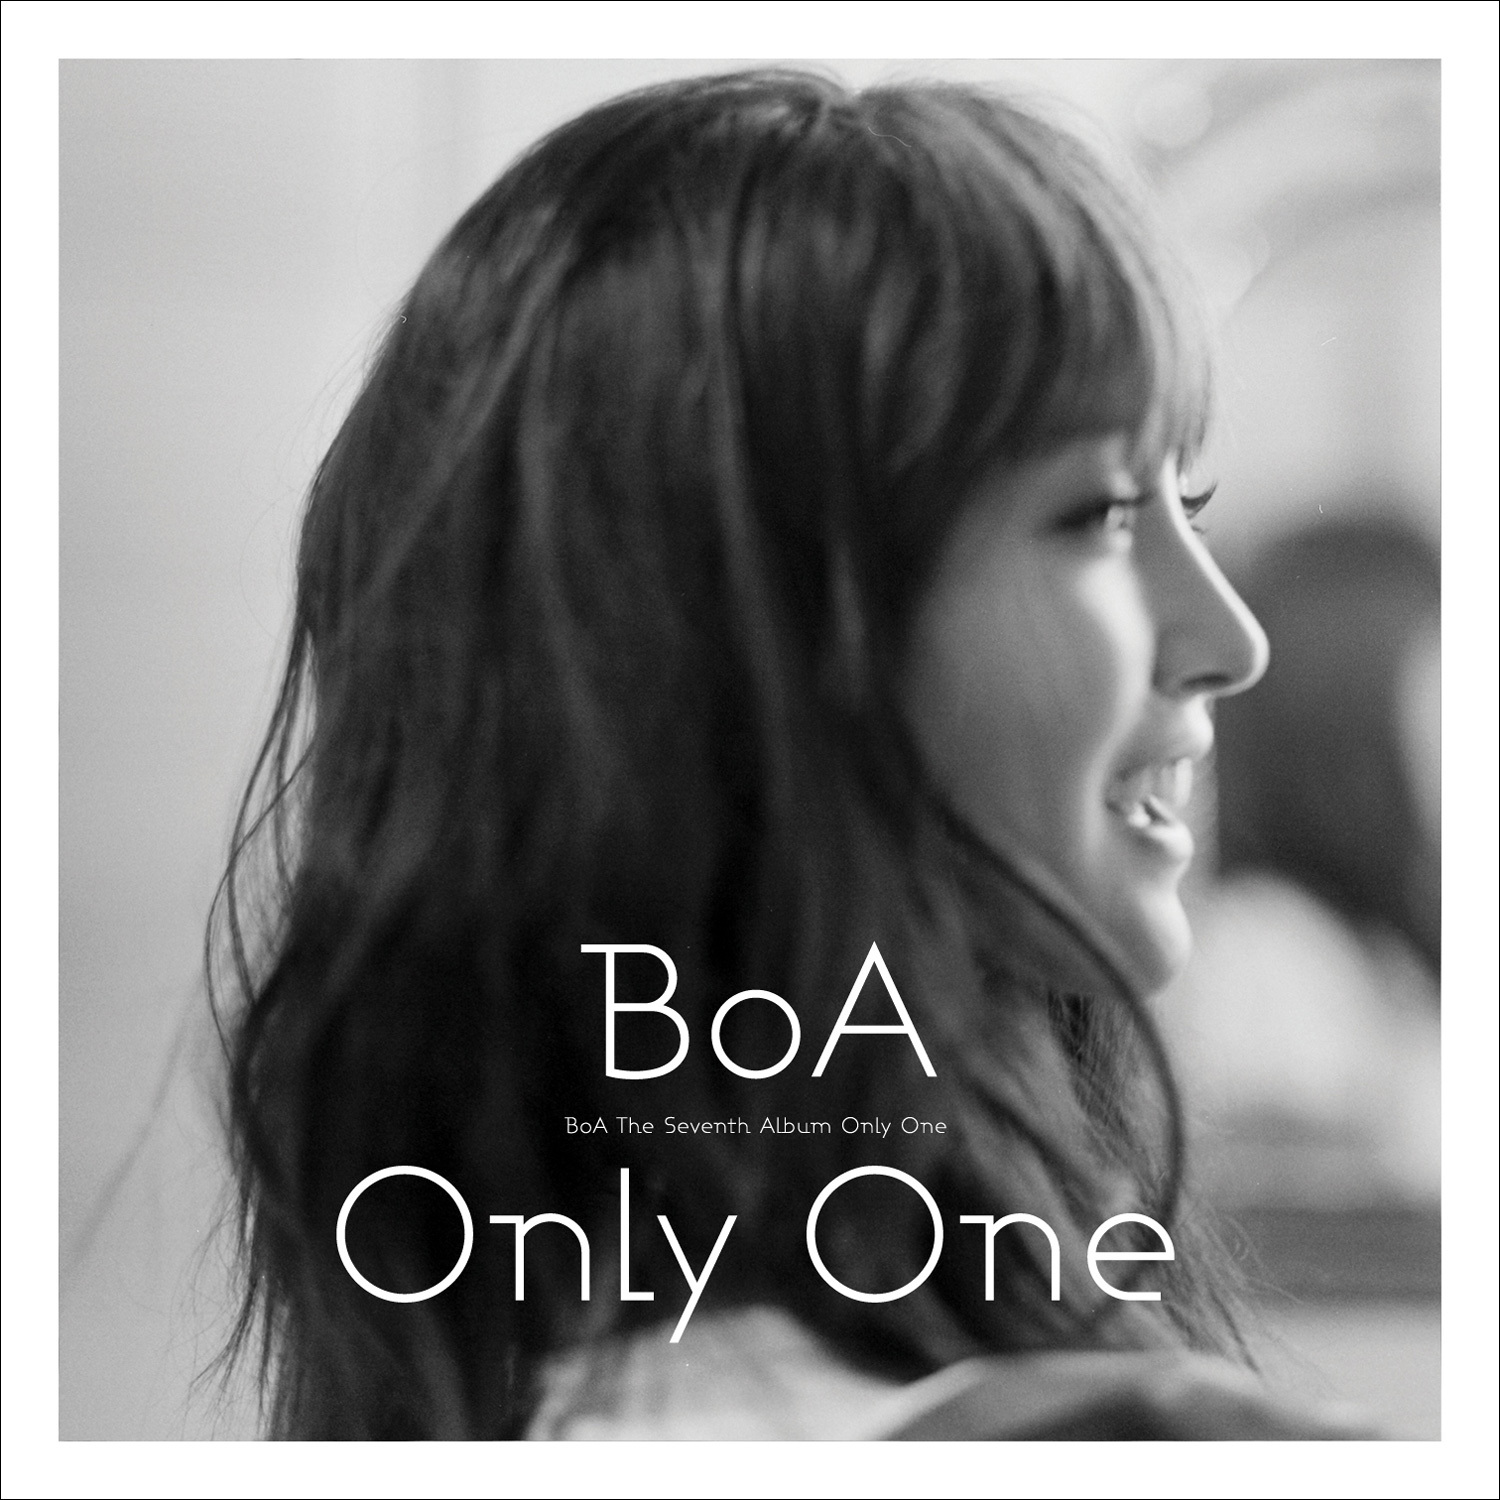 BoA Vol. 7 - Only One 2012